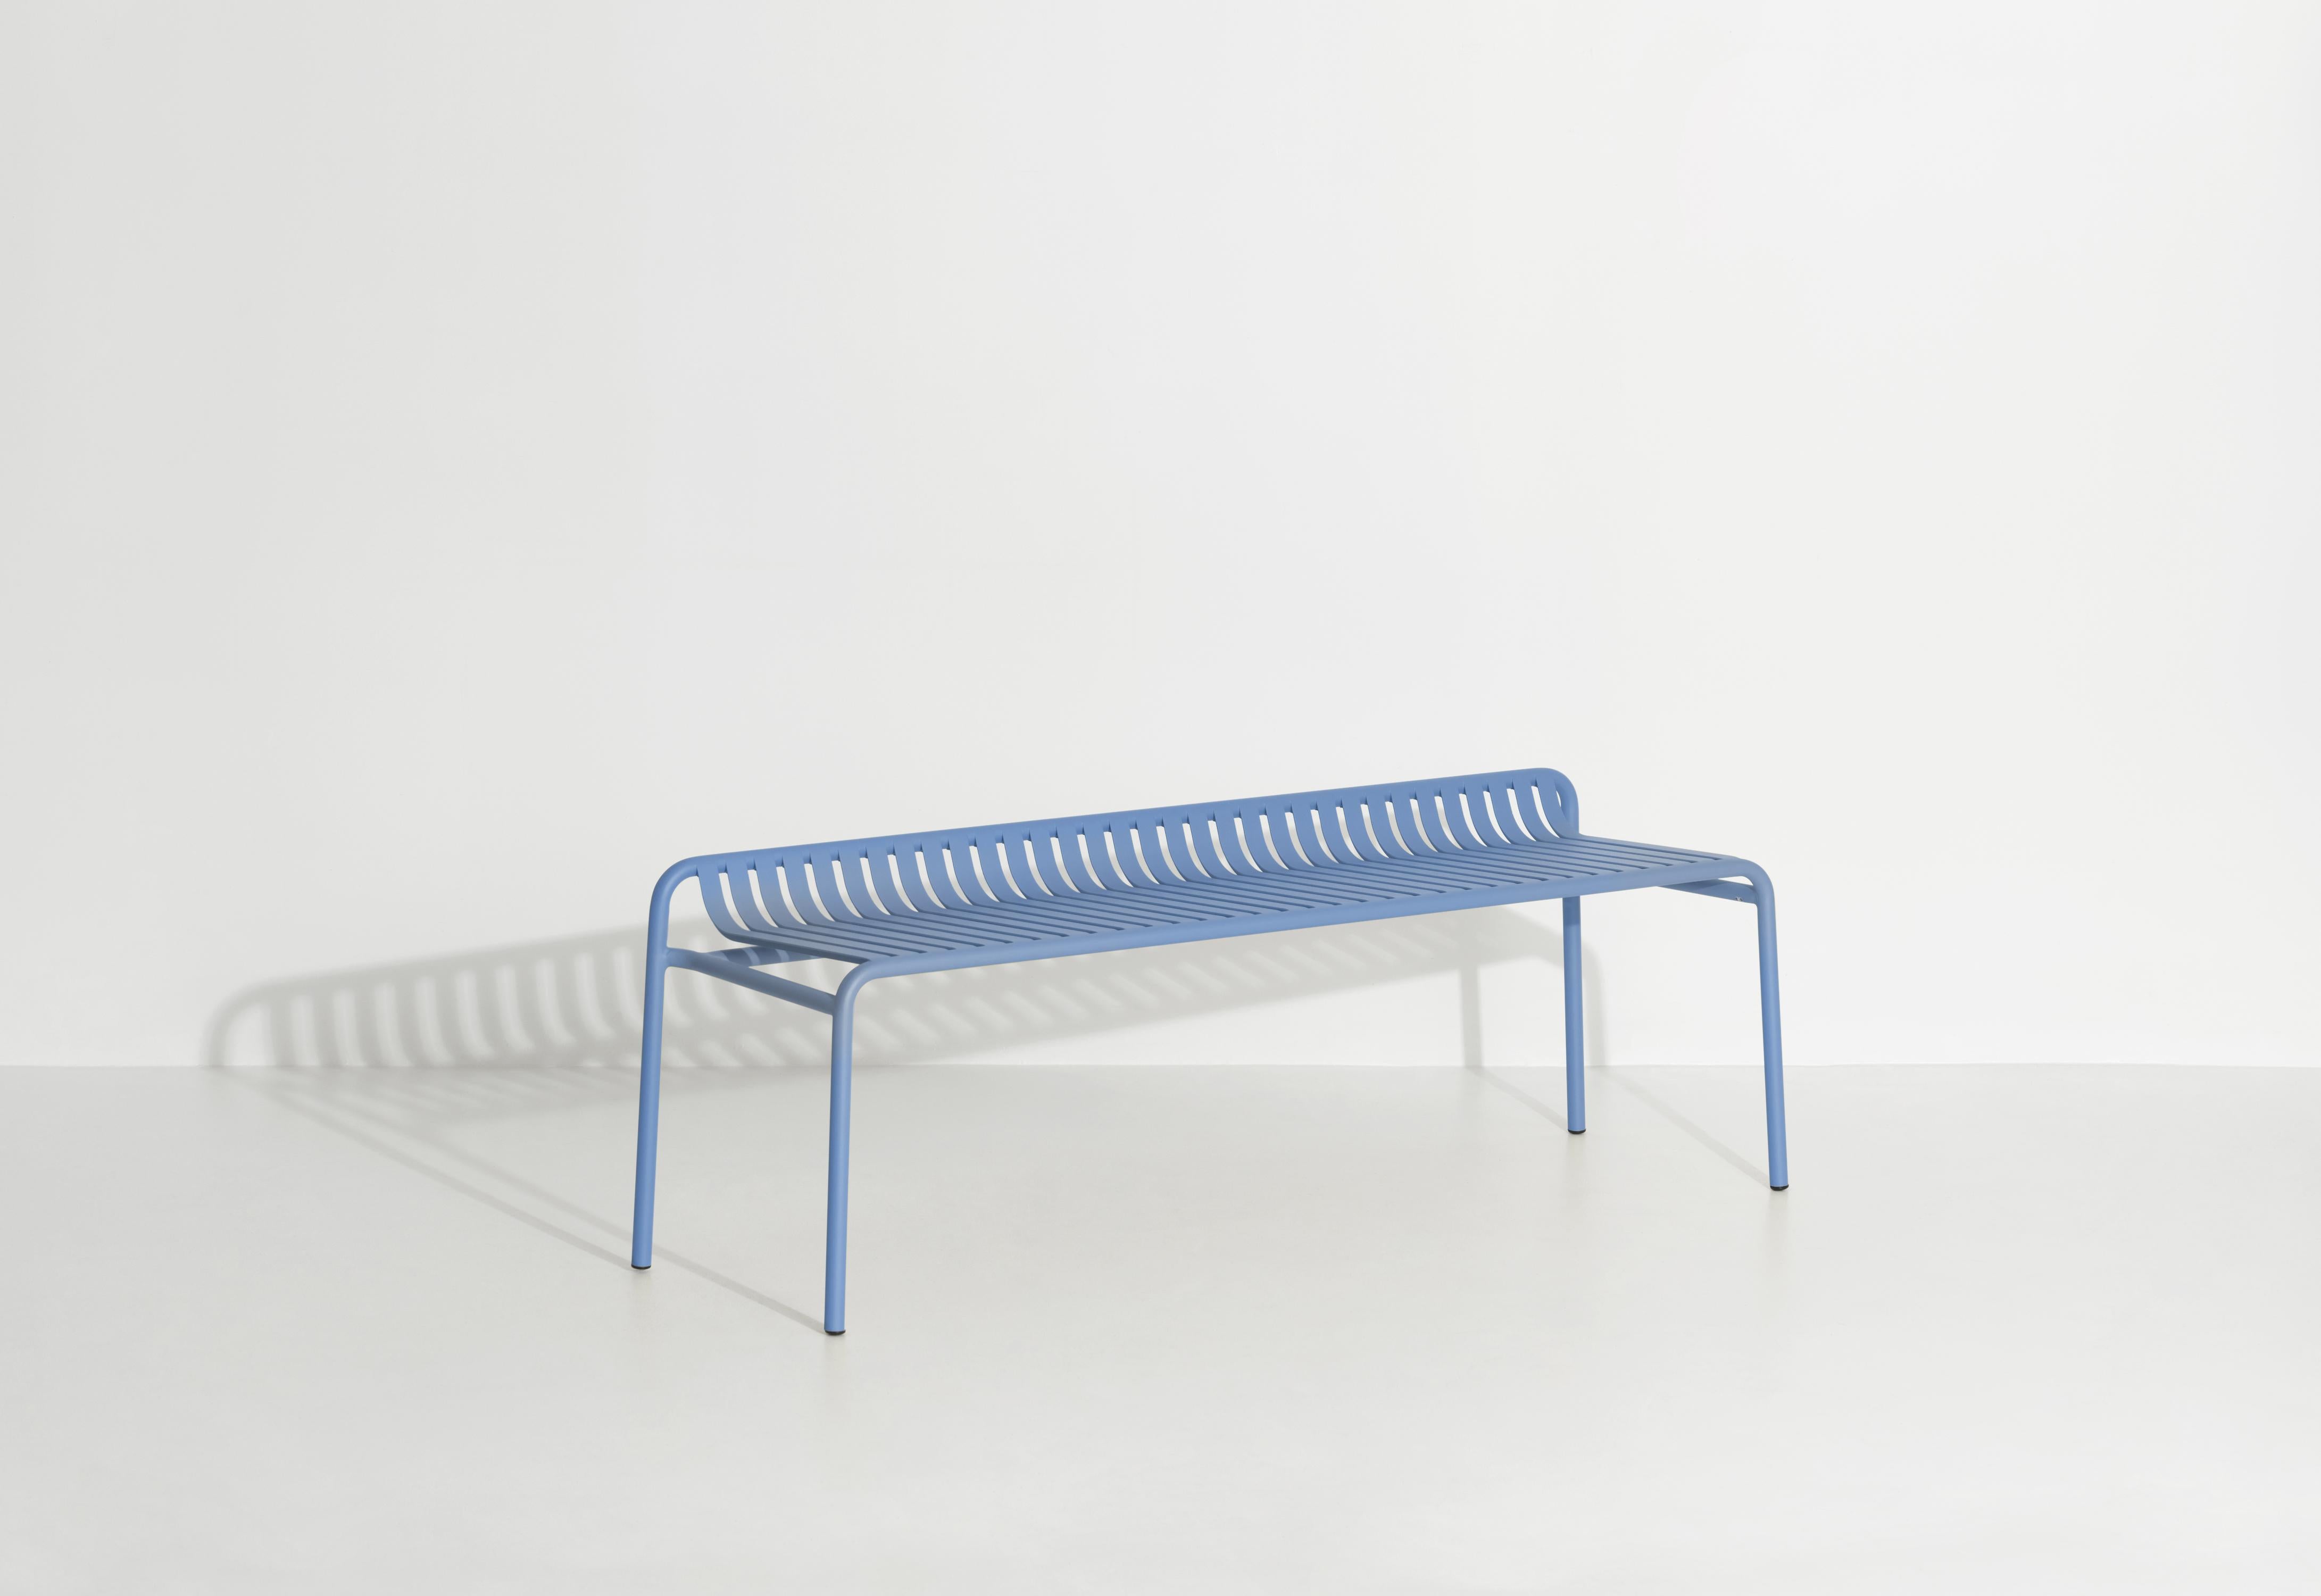 Petite Friture Week-End Bench without Back in Azur Blue Aluminium by Studio BrichetZiegler, 2017

The week-end collection is a full range of outdoor furniture, in aluminium grained epoxy paint, matt finish, that includes 18 functions and 8 colours